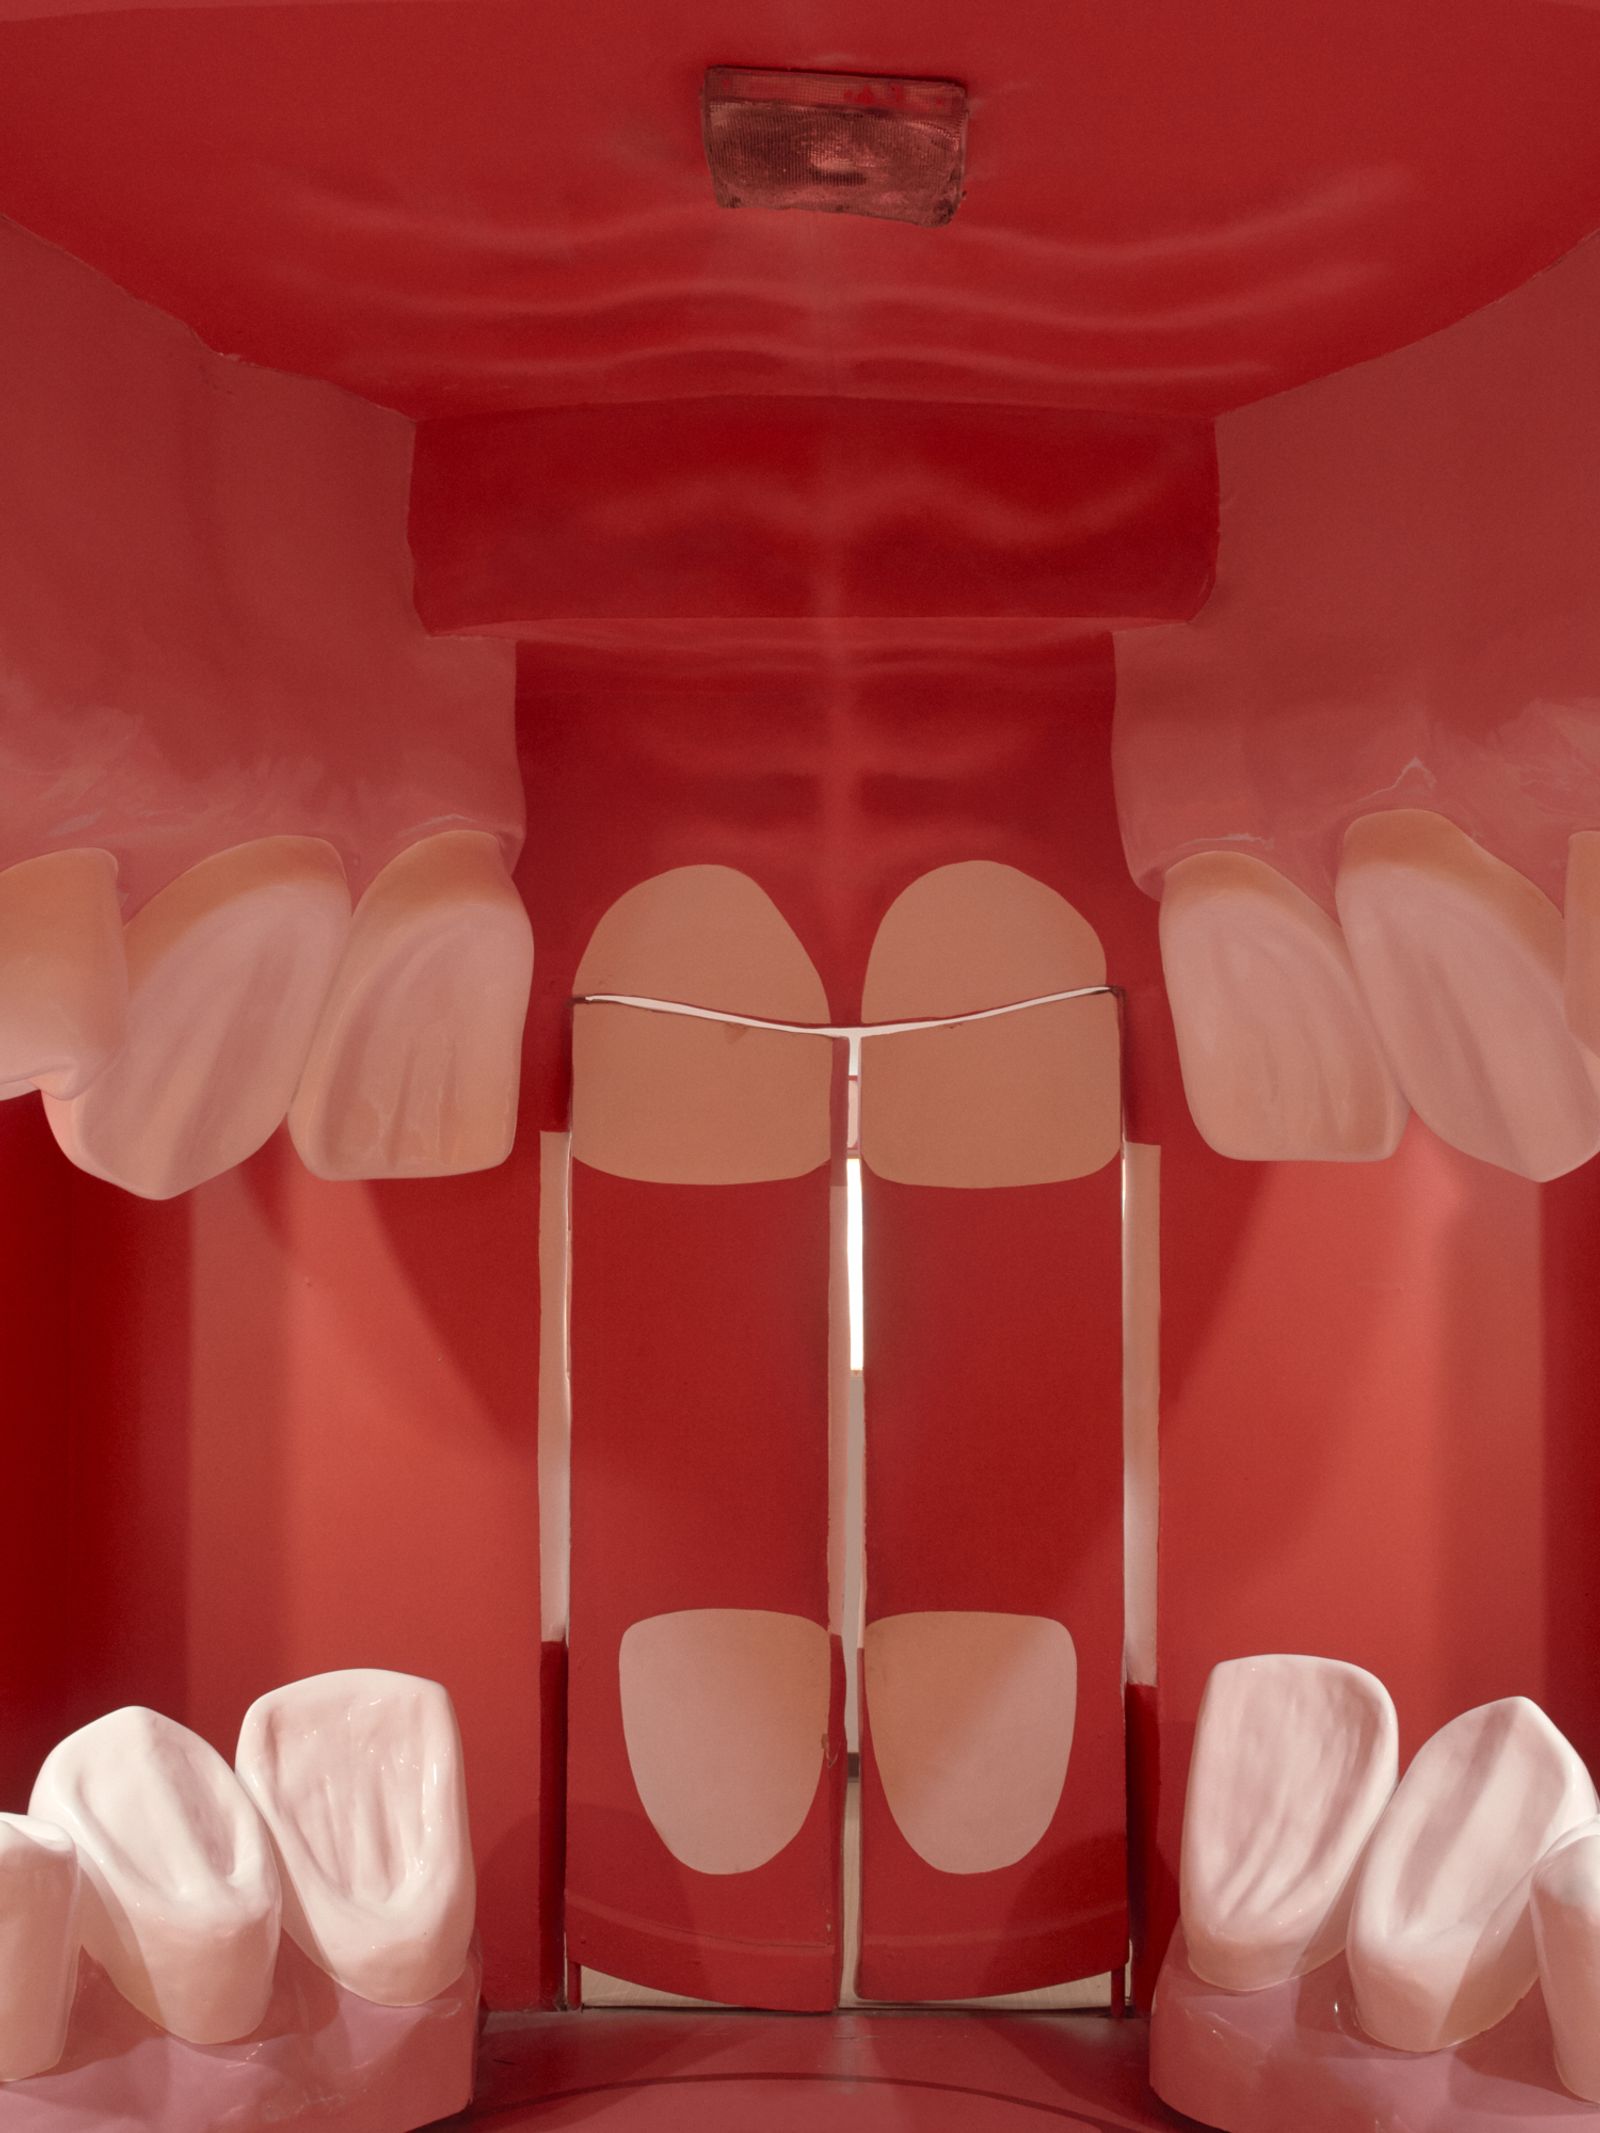 © Joel Jimenez - Museum room designed as a large scale replica of the inside of a human mouth.